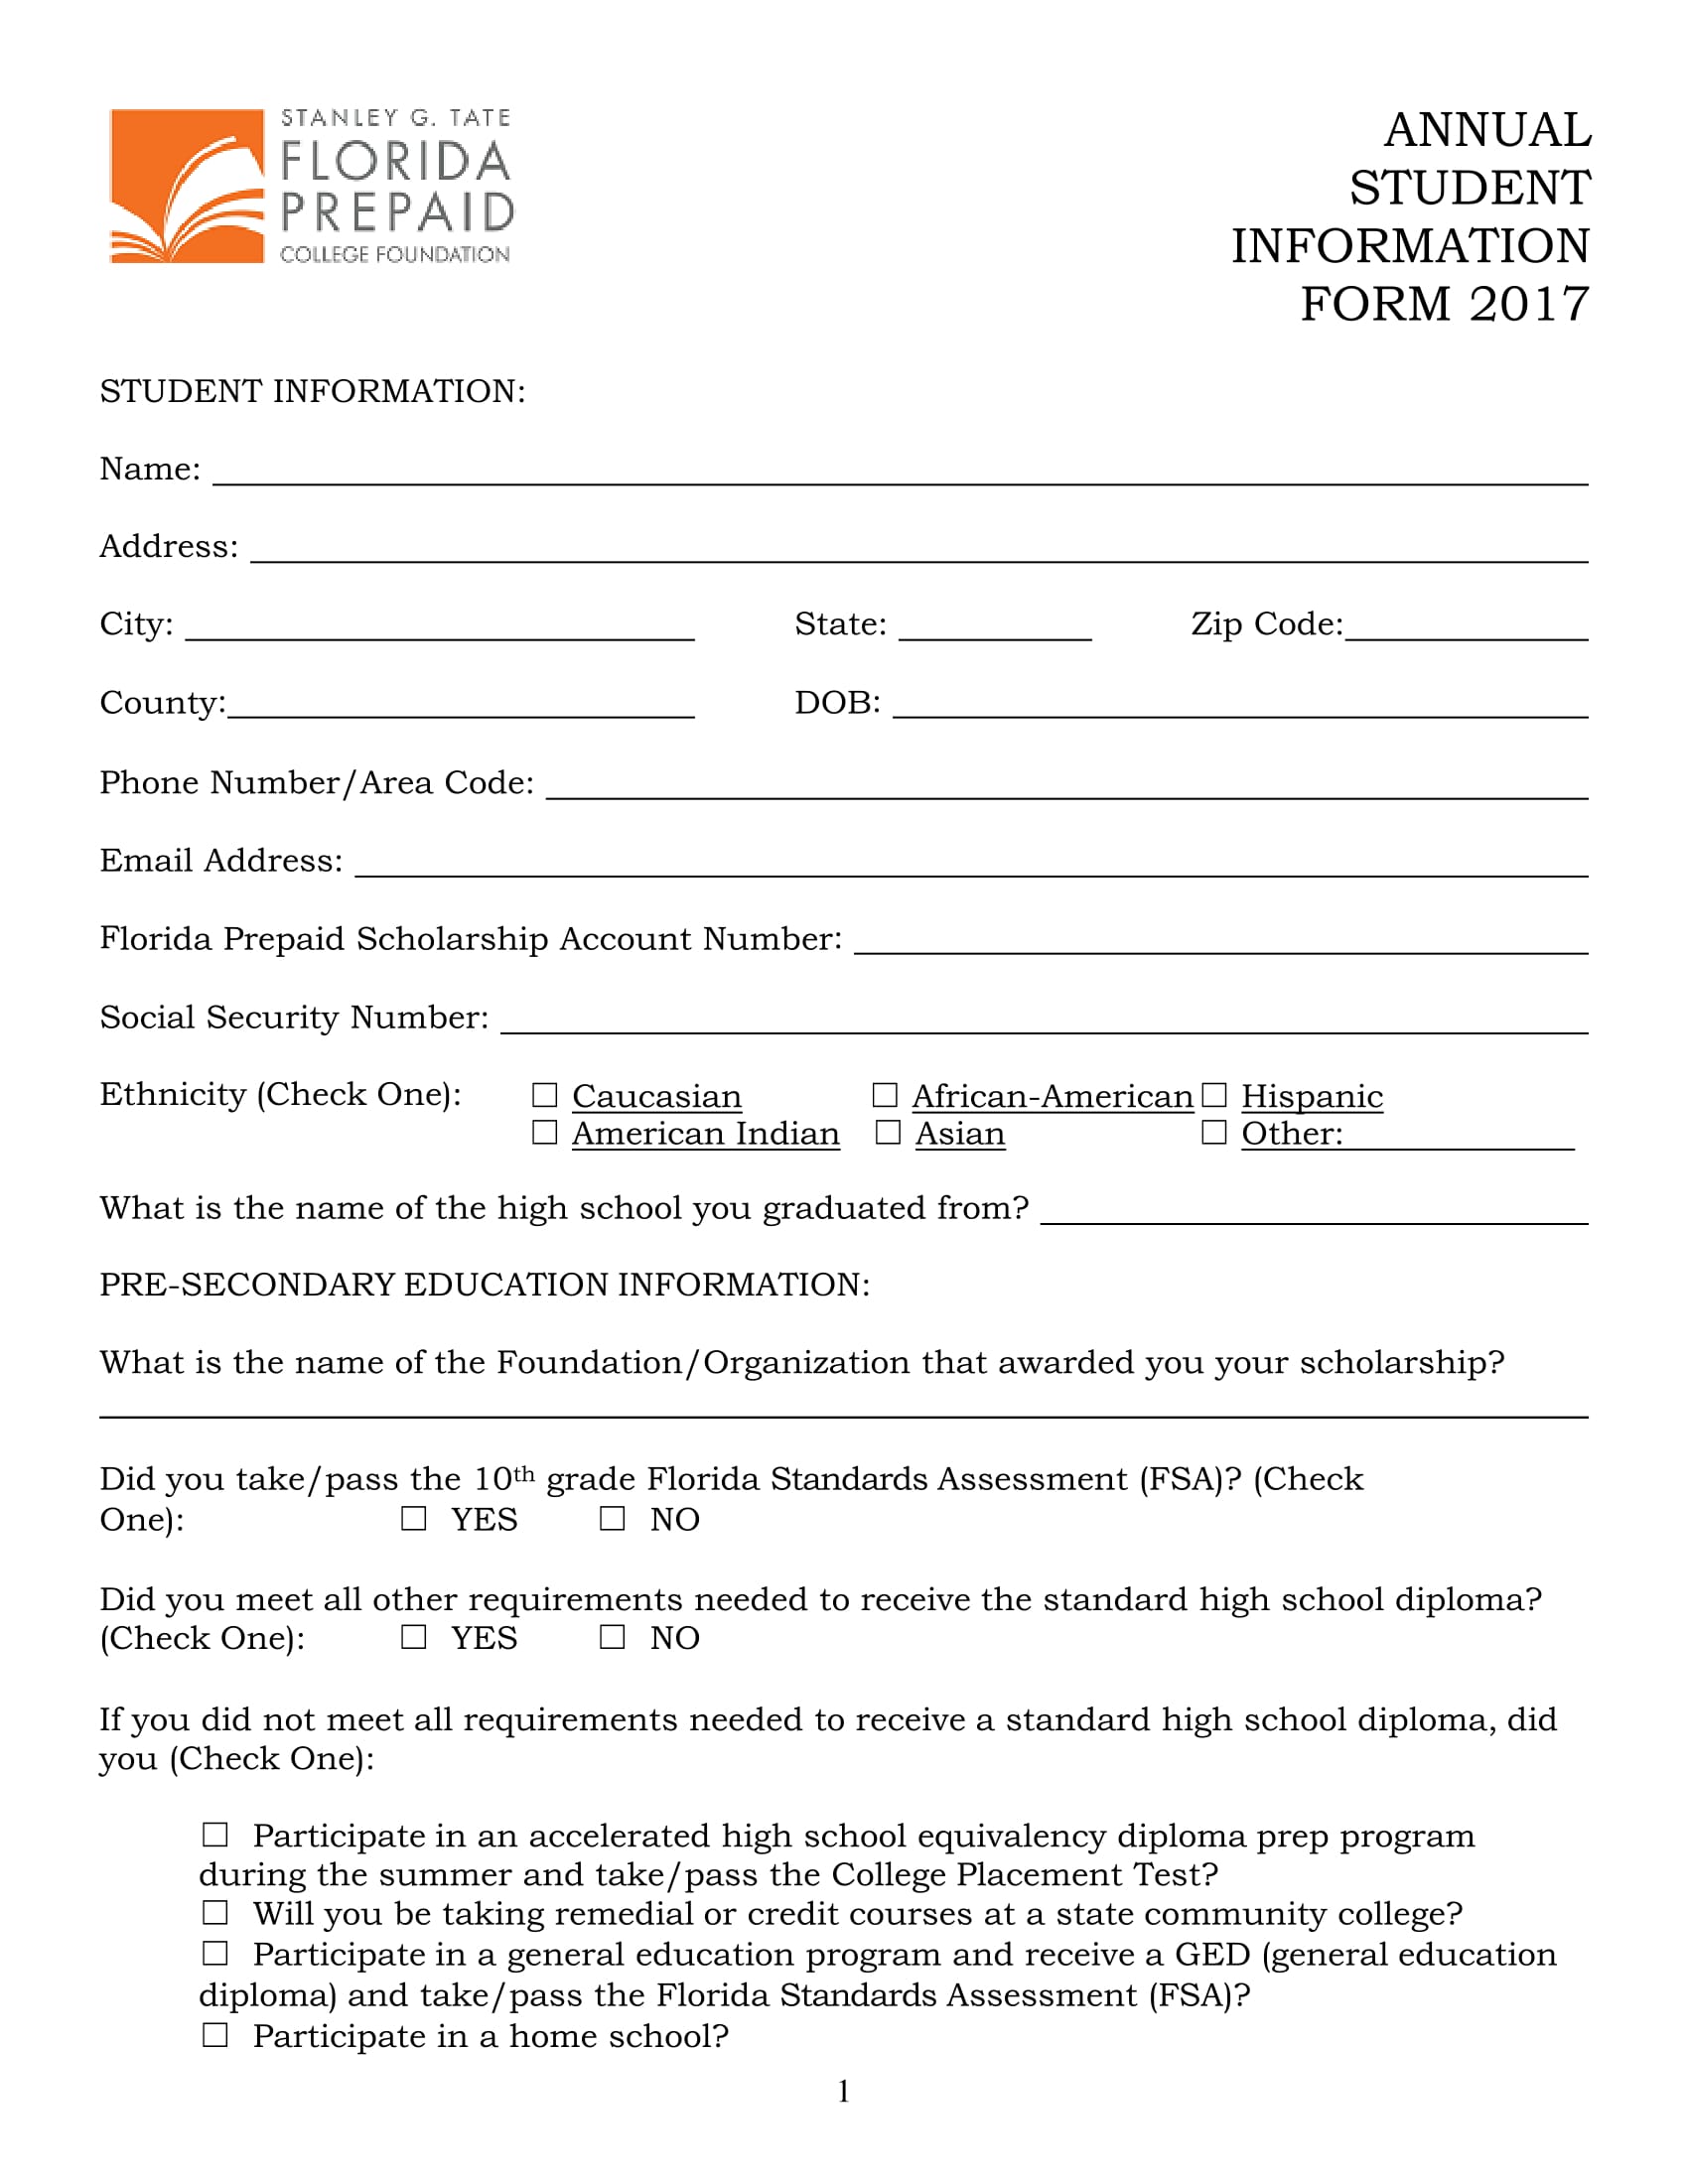 annual student information form 1